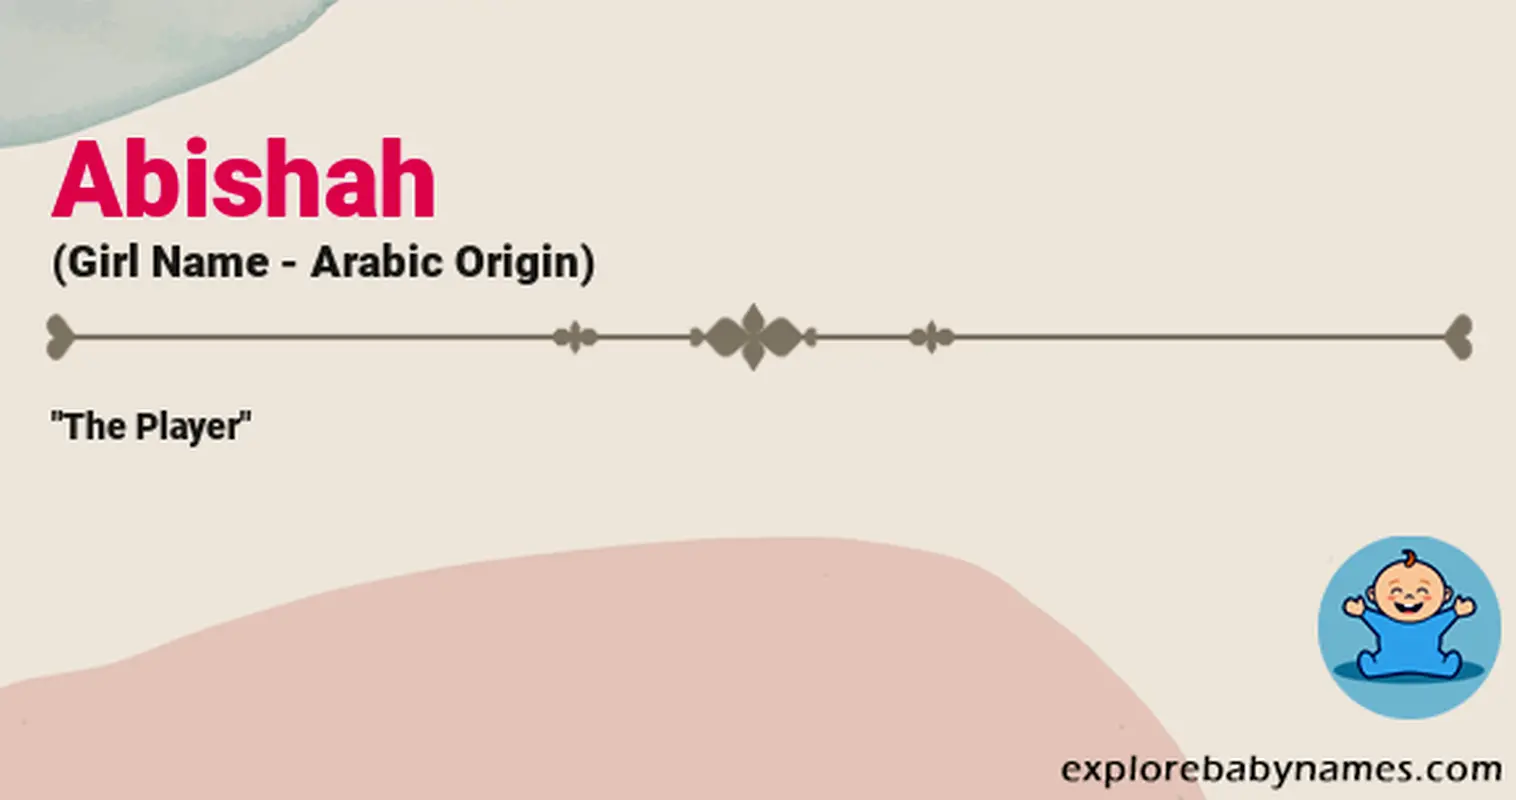 Meaning of Abishah